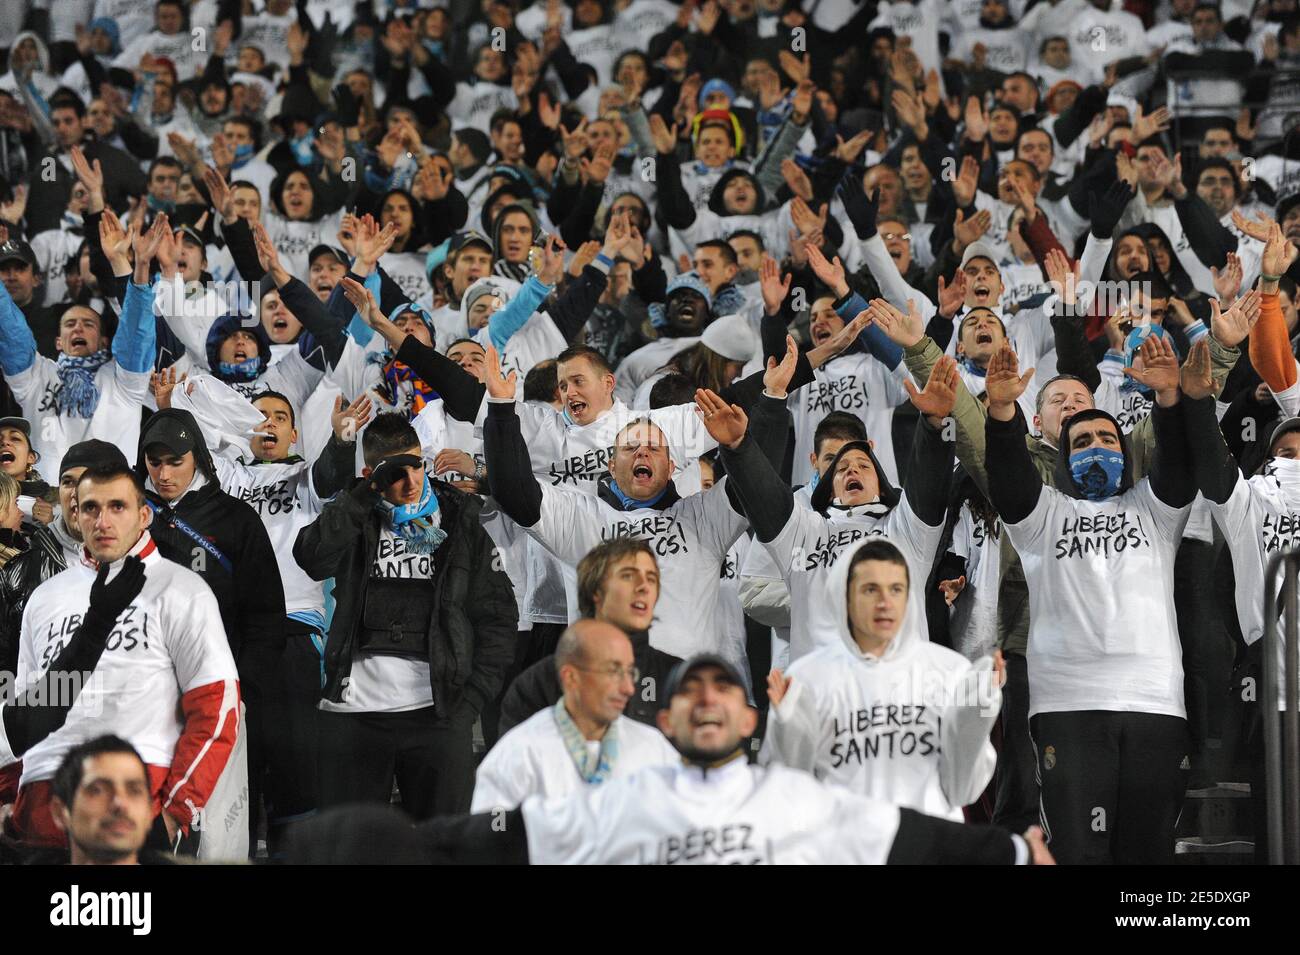 Marseille's football fans hold tee-shirt reading 'Release Santos' during  the UEFA Champions League Soccer match, Olympique de Marseille vs Athletico  Madrid at the Veledrome stadium in Marseille, France on December 09, 2008.